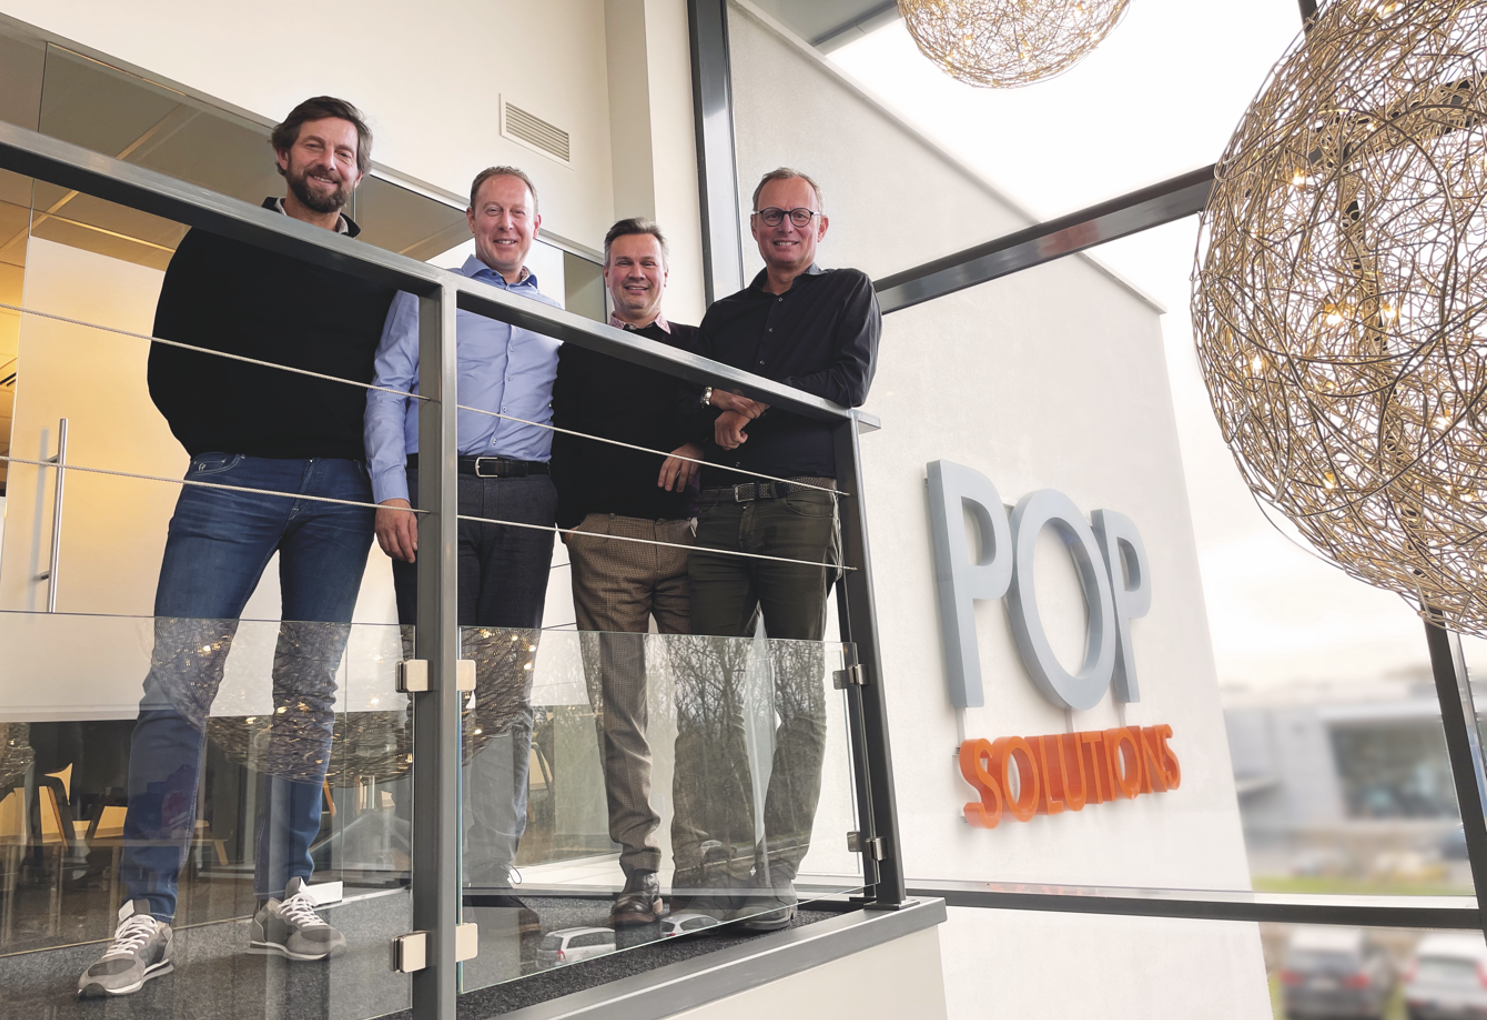 POP Solutions reaches for the stars with a majority stake in Belgian permanent display specialist Kozmoz